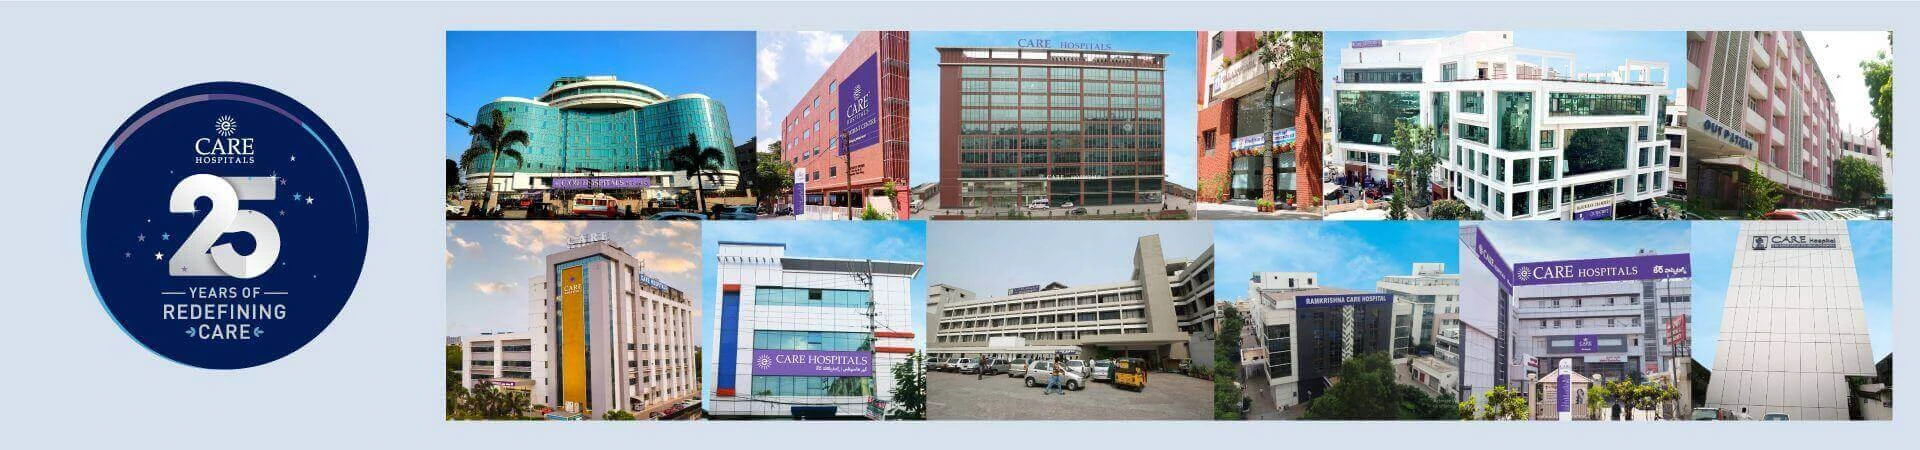 Best Hospital in India